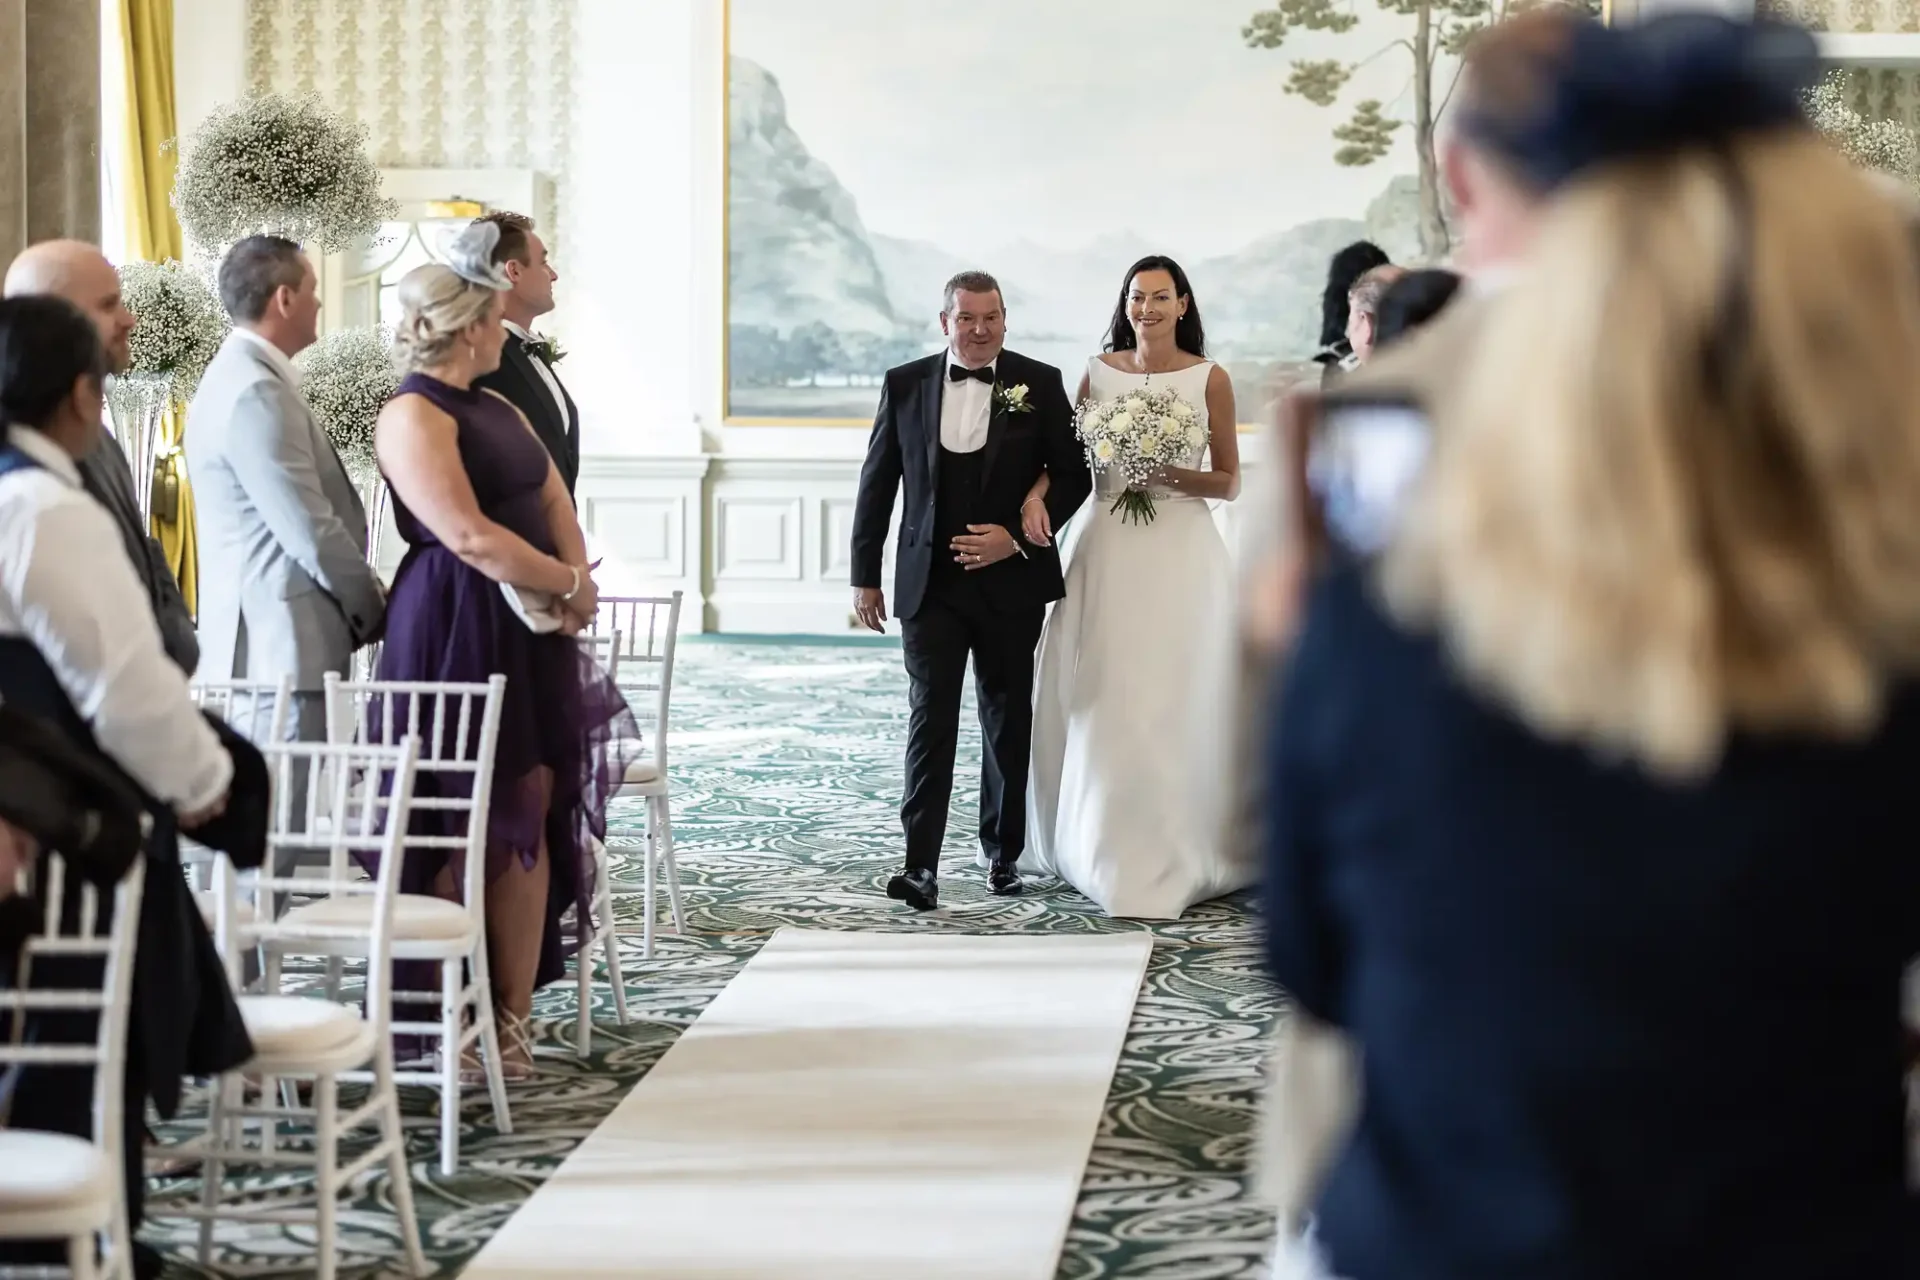 A bride walking down the aisle with her father, guests watching on either side in a decorated room.